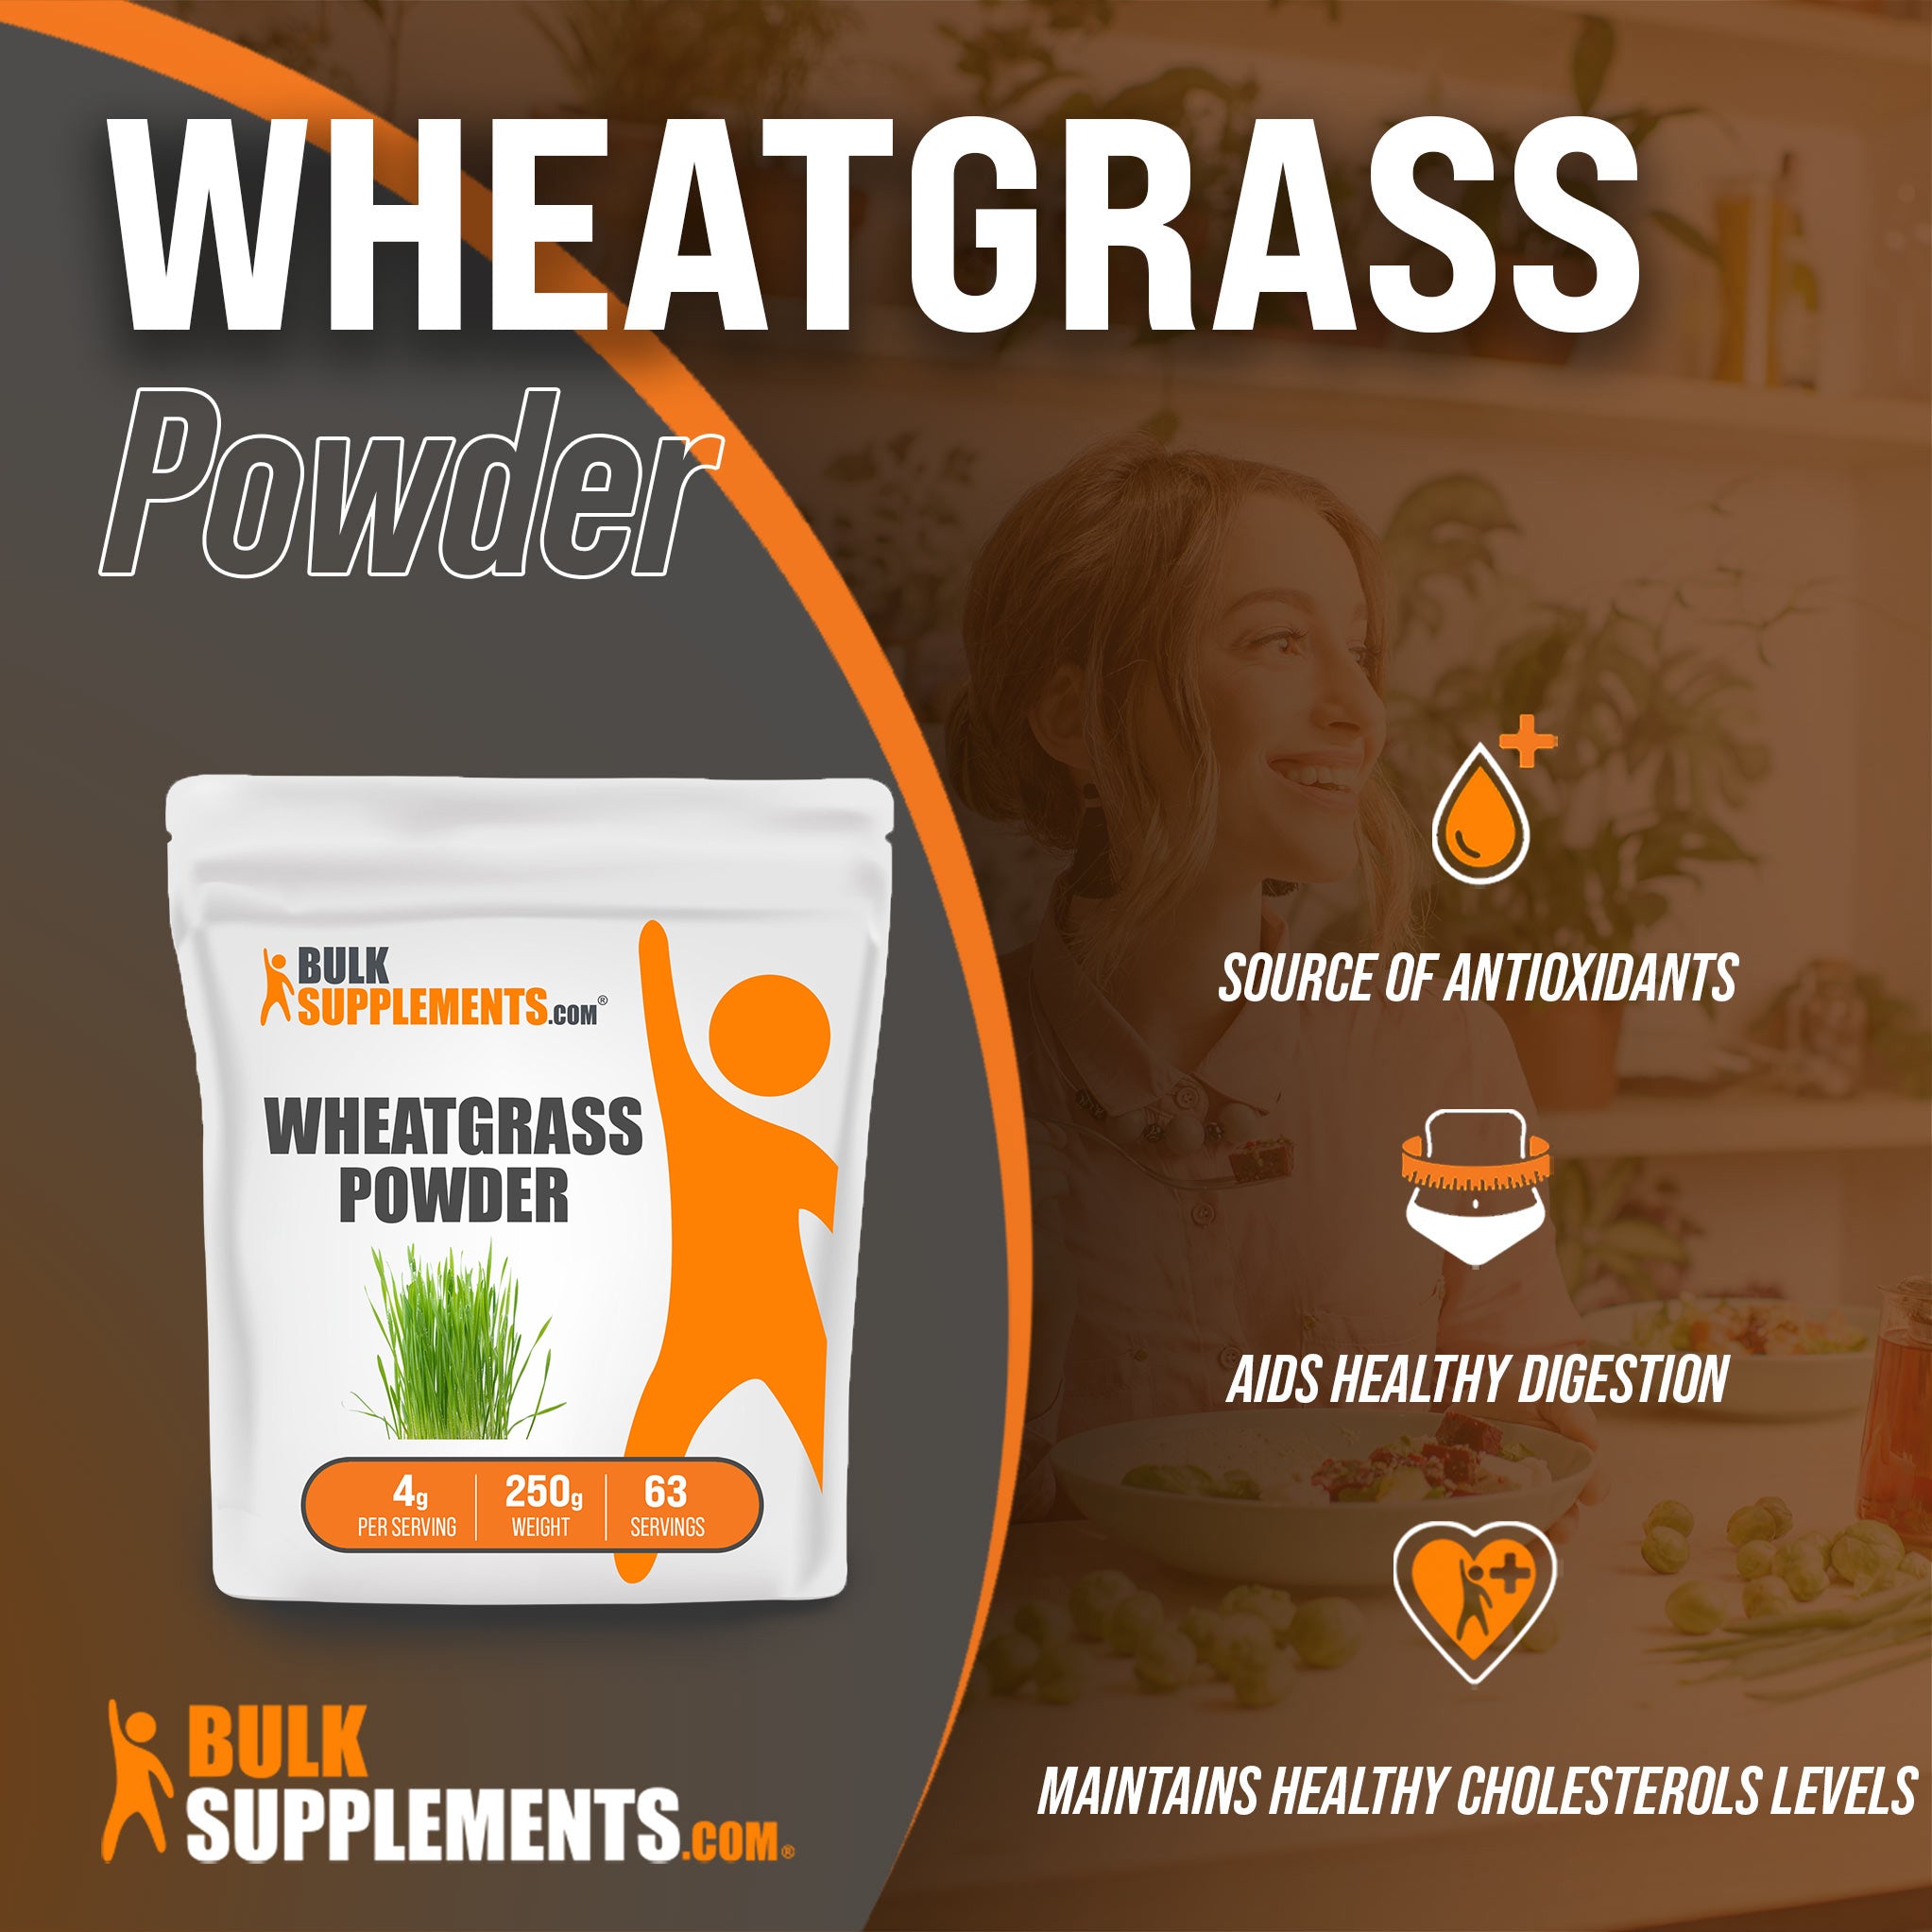 Benefits of Wheatgrass Powder: source of antioxidants, aids healthy digestion, maintains healthy cholesterol levels